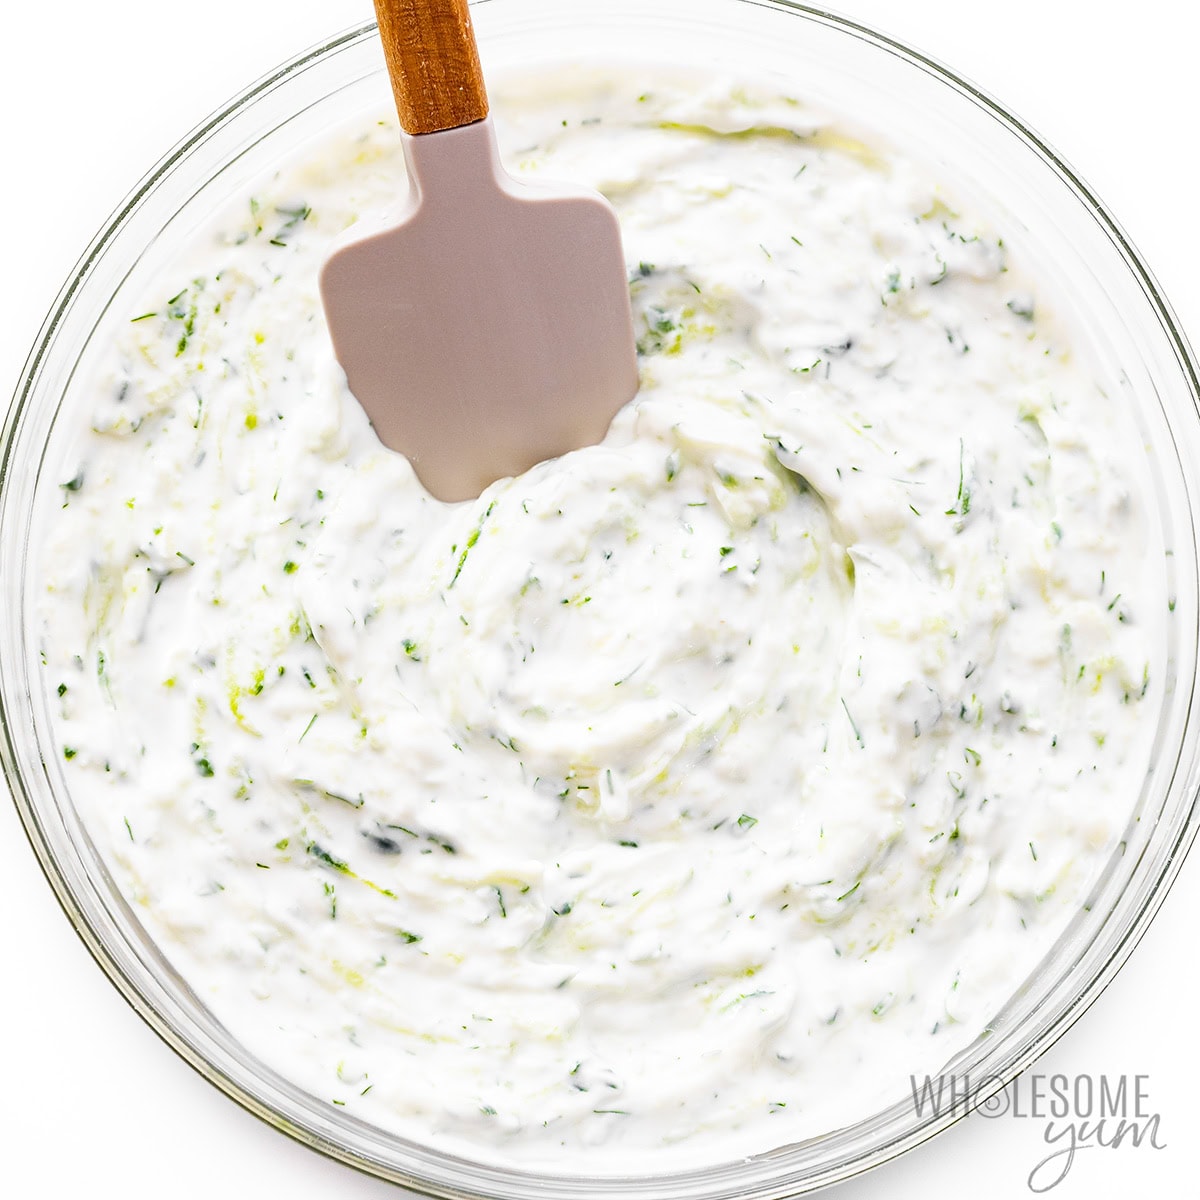 Shredded cucumbers added to yogurt mixture and mixed with a spatula.